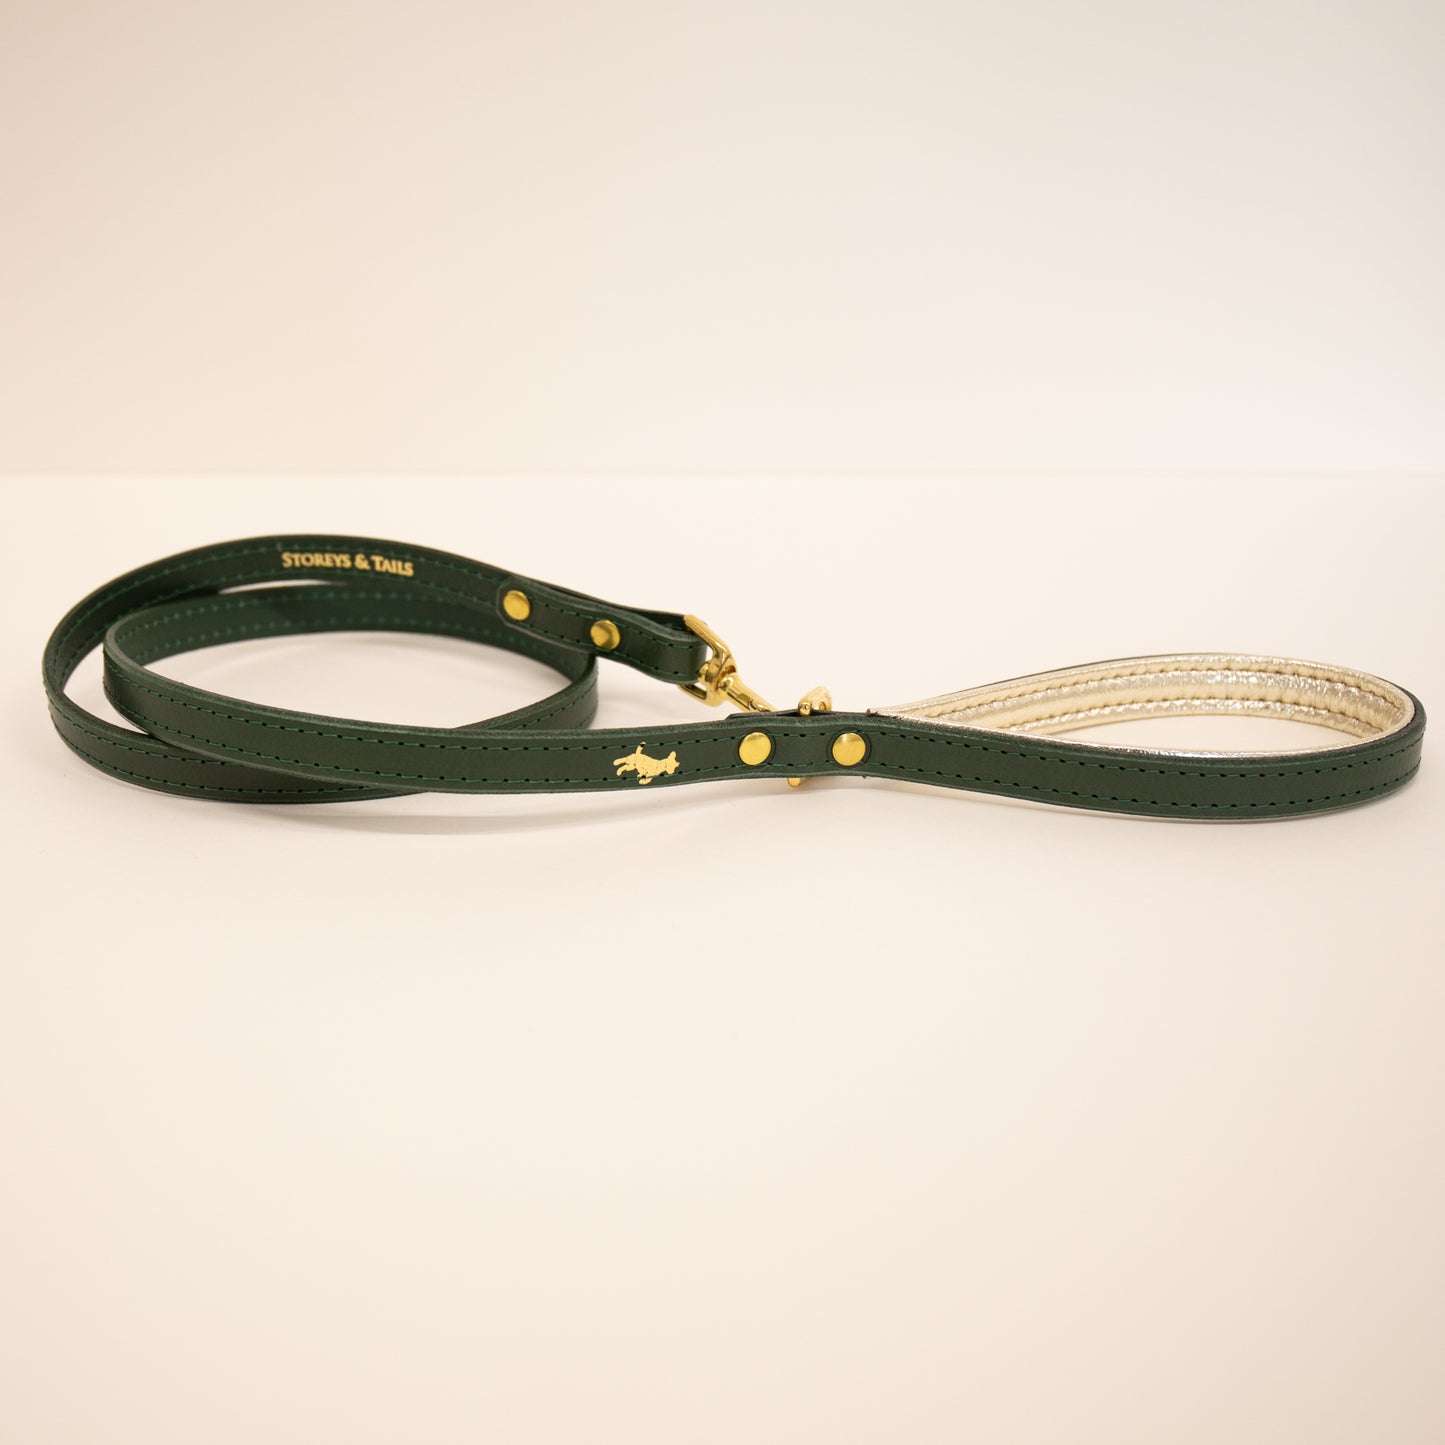 Forest padded luxury leather lead